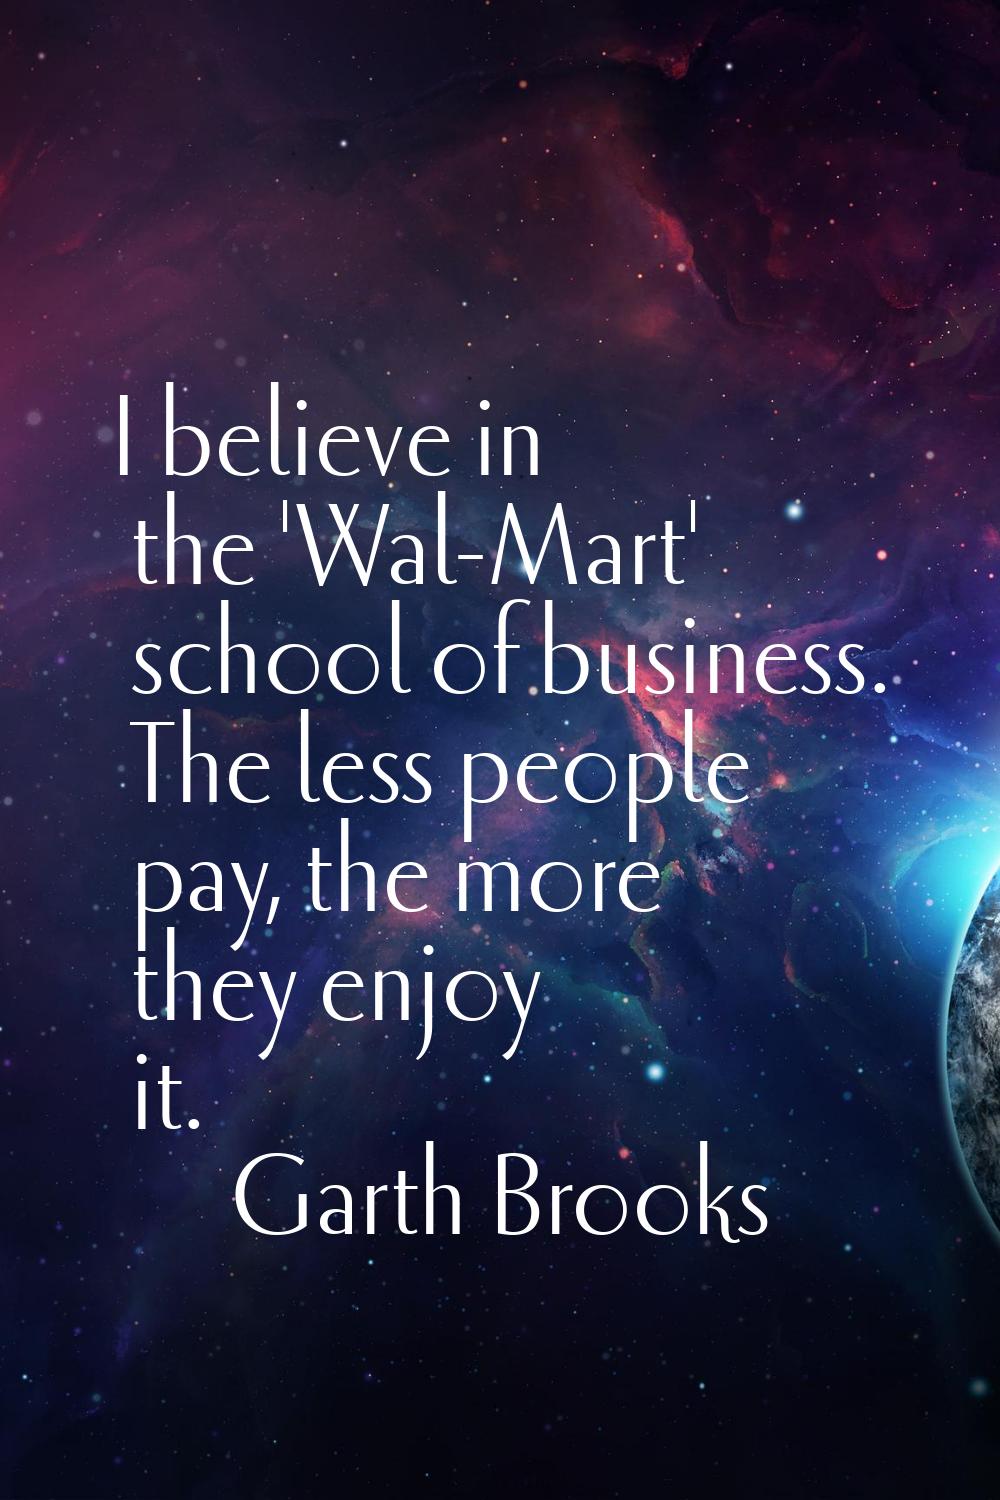 I believe in the 'Wal-Mart' school of business. The less people pay, the more they enjoy it.